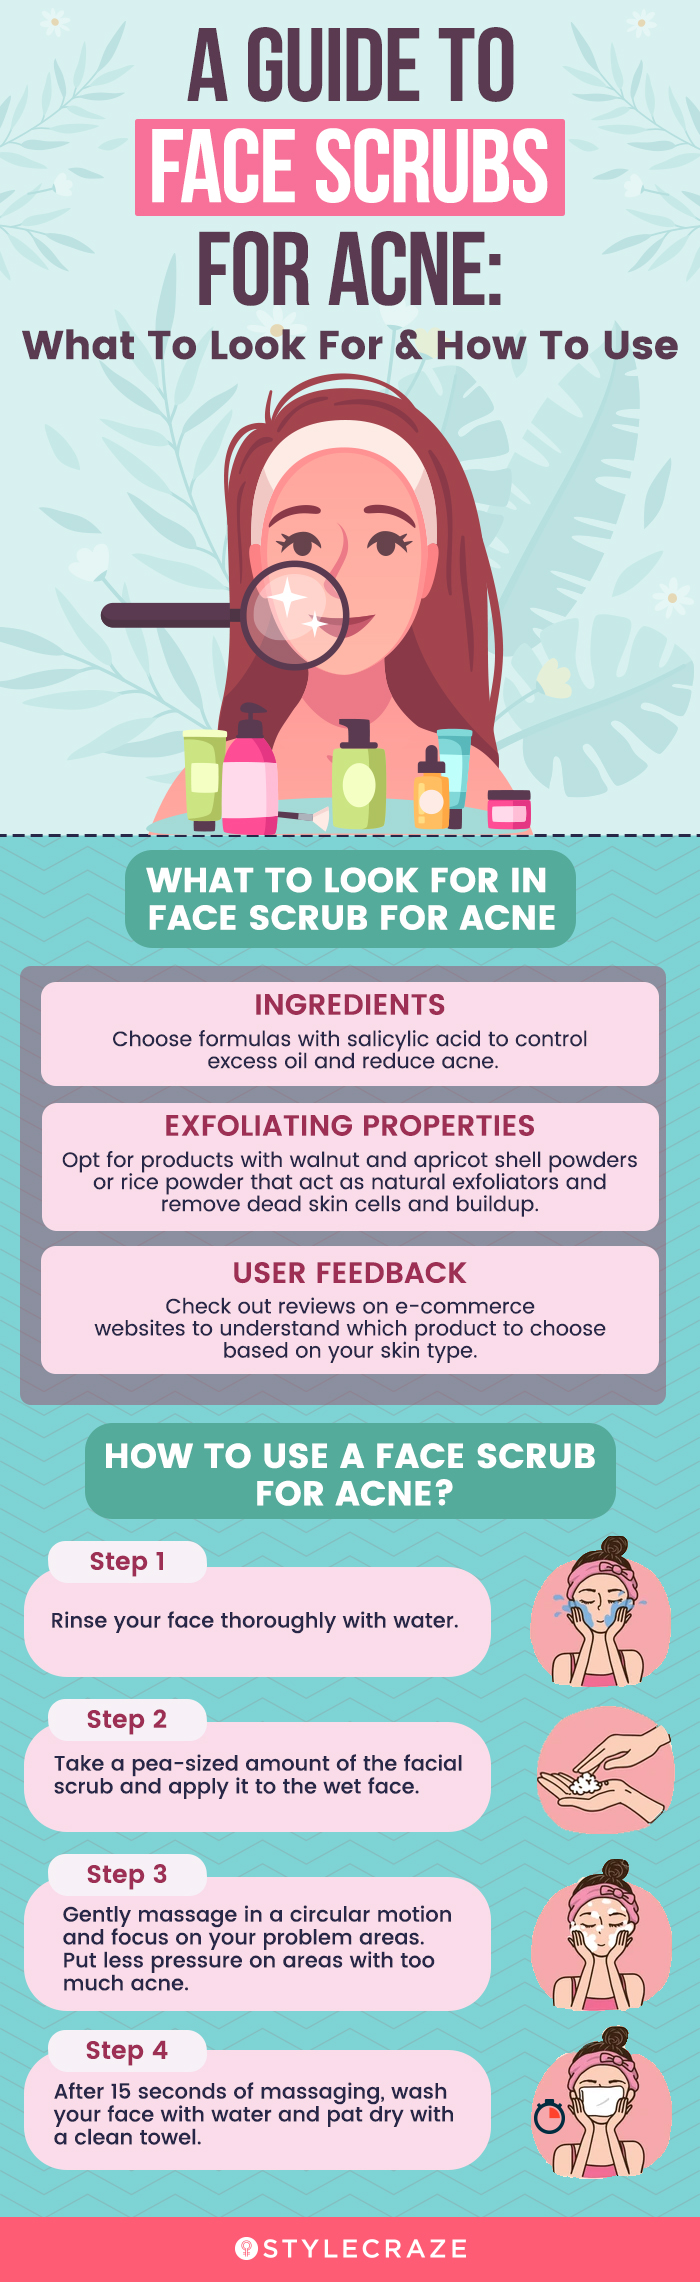 A Guide To Face Scrubs For Acne (infographic)